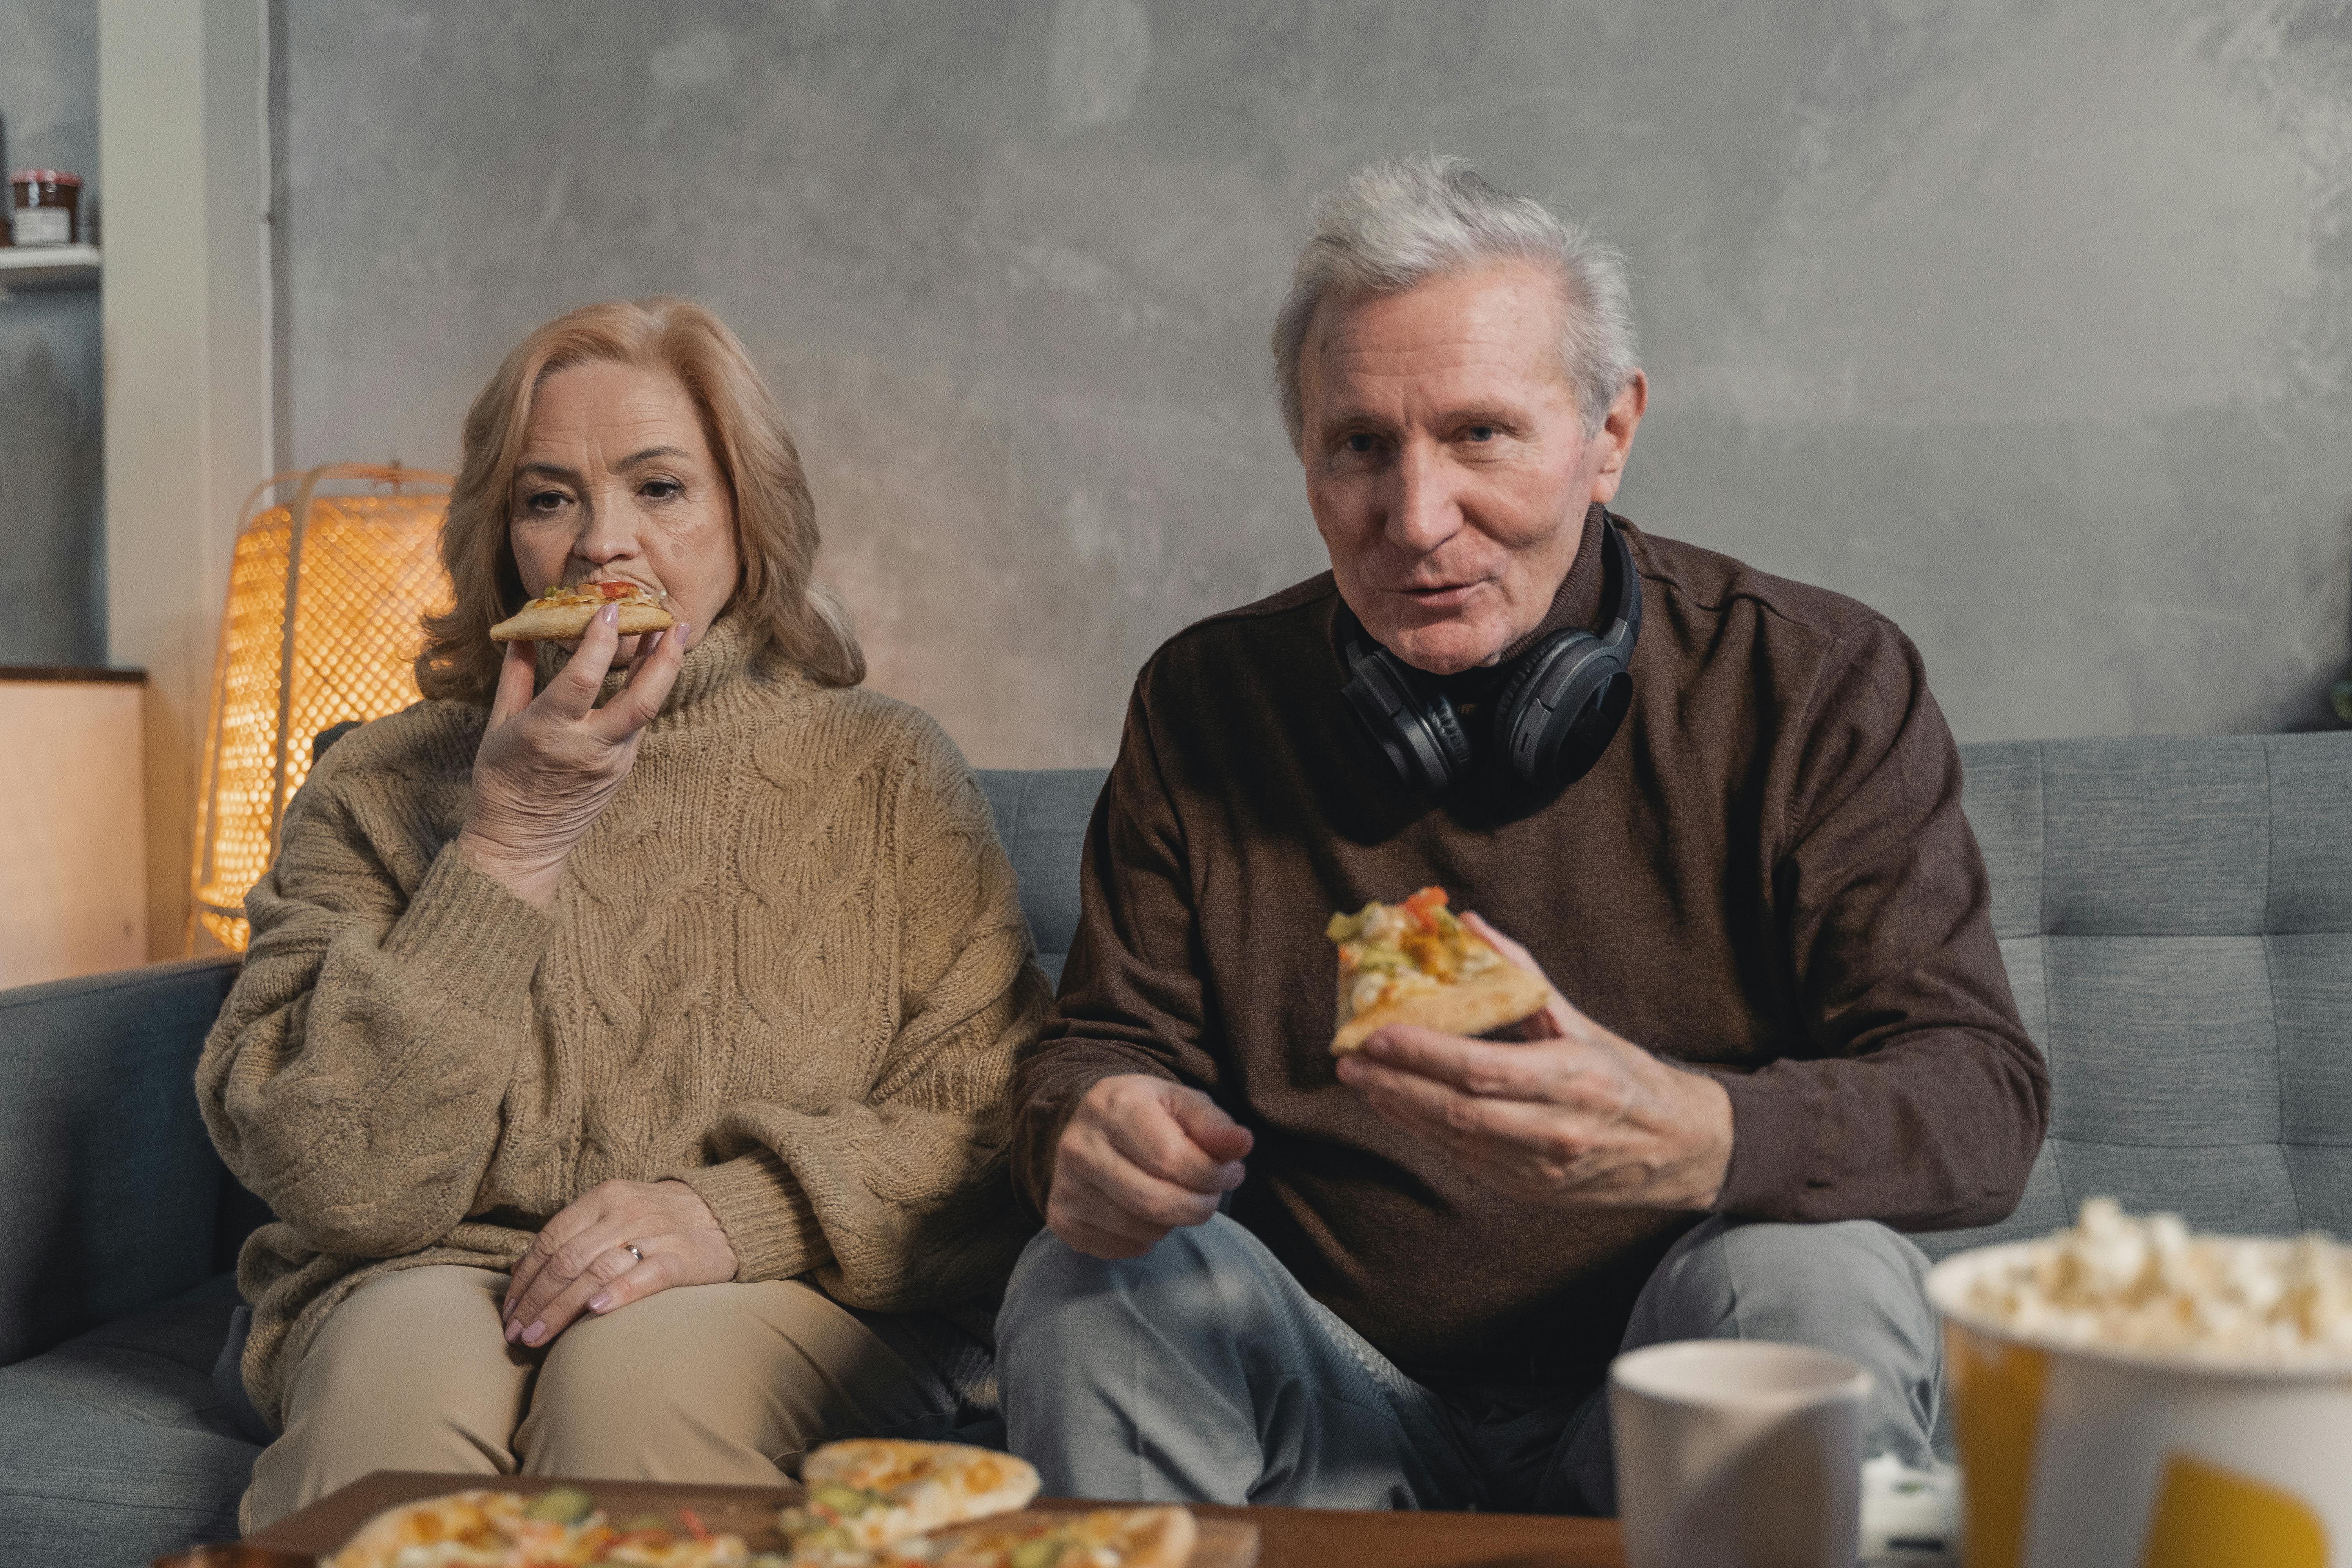 elderly couple sitting on couch eating pizza